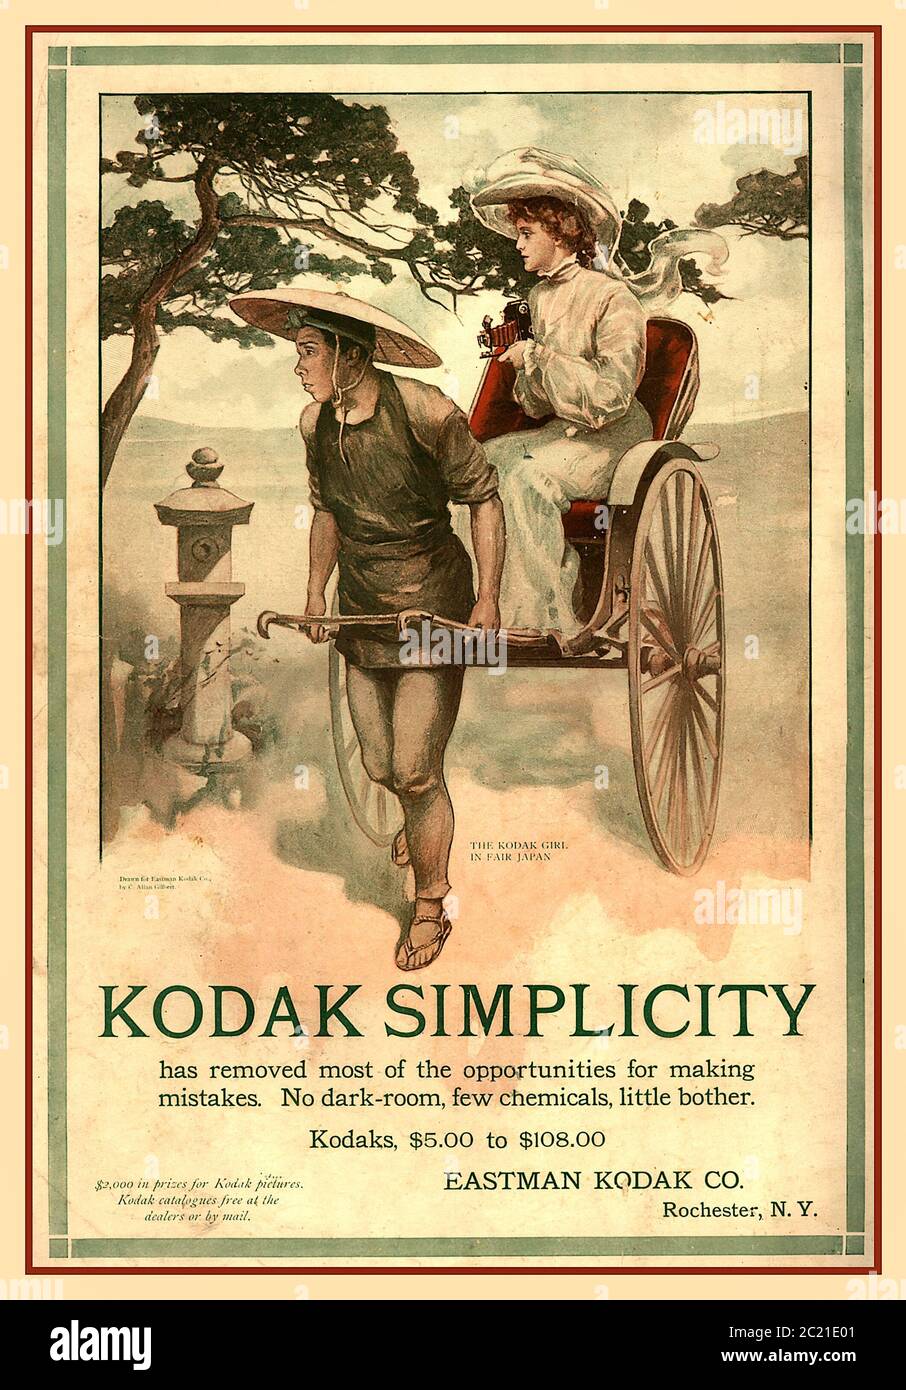 Vintage Kodak Advertising Poster 1905 'The Kodak Girl in Fair Japan. 'Kodak Simplicity' has removed most of the opportunities for making mistakes. No dark-room, few chemicals, little bother. Kodaks, (five to one-hundred and eight dollars) Eastman Kodak Co. Rochester, N.Y. (two-thousand dollars) in prizes for Kodak pictures, Kodak catalogues free at the dealer or by mail.' Stock Photo